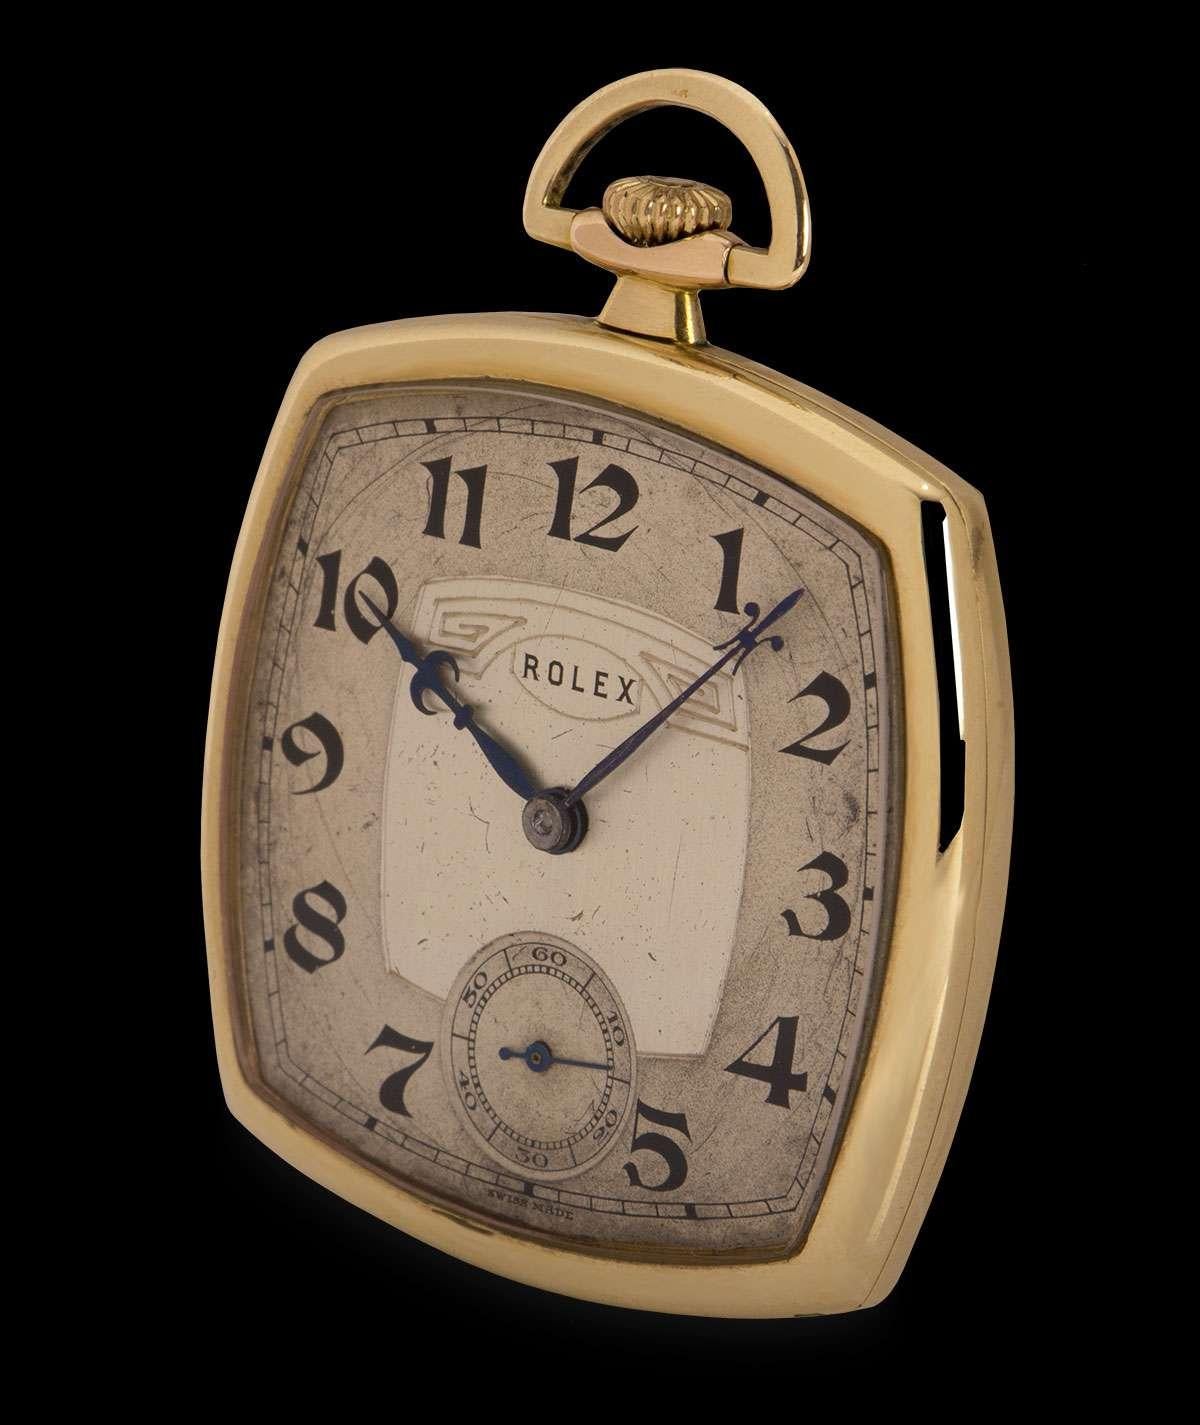 A Rare 9k Yellow Gold Art Deco Open Face Vintage Gents 40mm Pocket Watch, silver dial with art deco arabic numbers, small seconds at 6 0'clock, blued steel hands, a fixed 9k yellow gold bezel, mineral glass, manual wind movement, in excellent